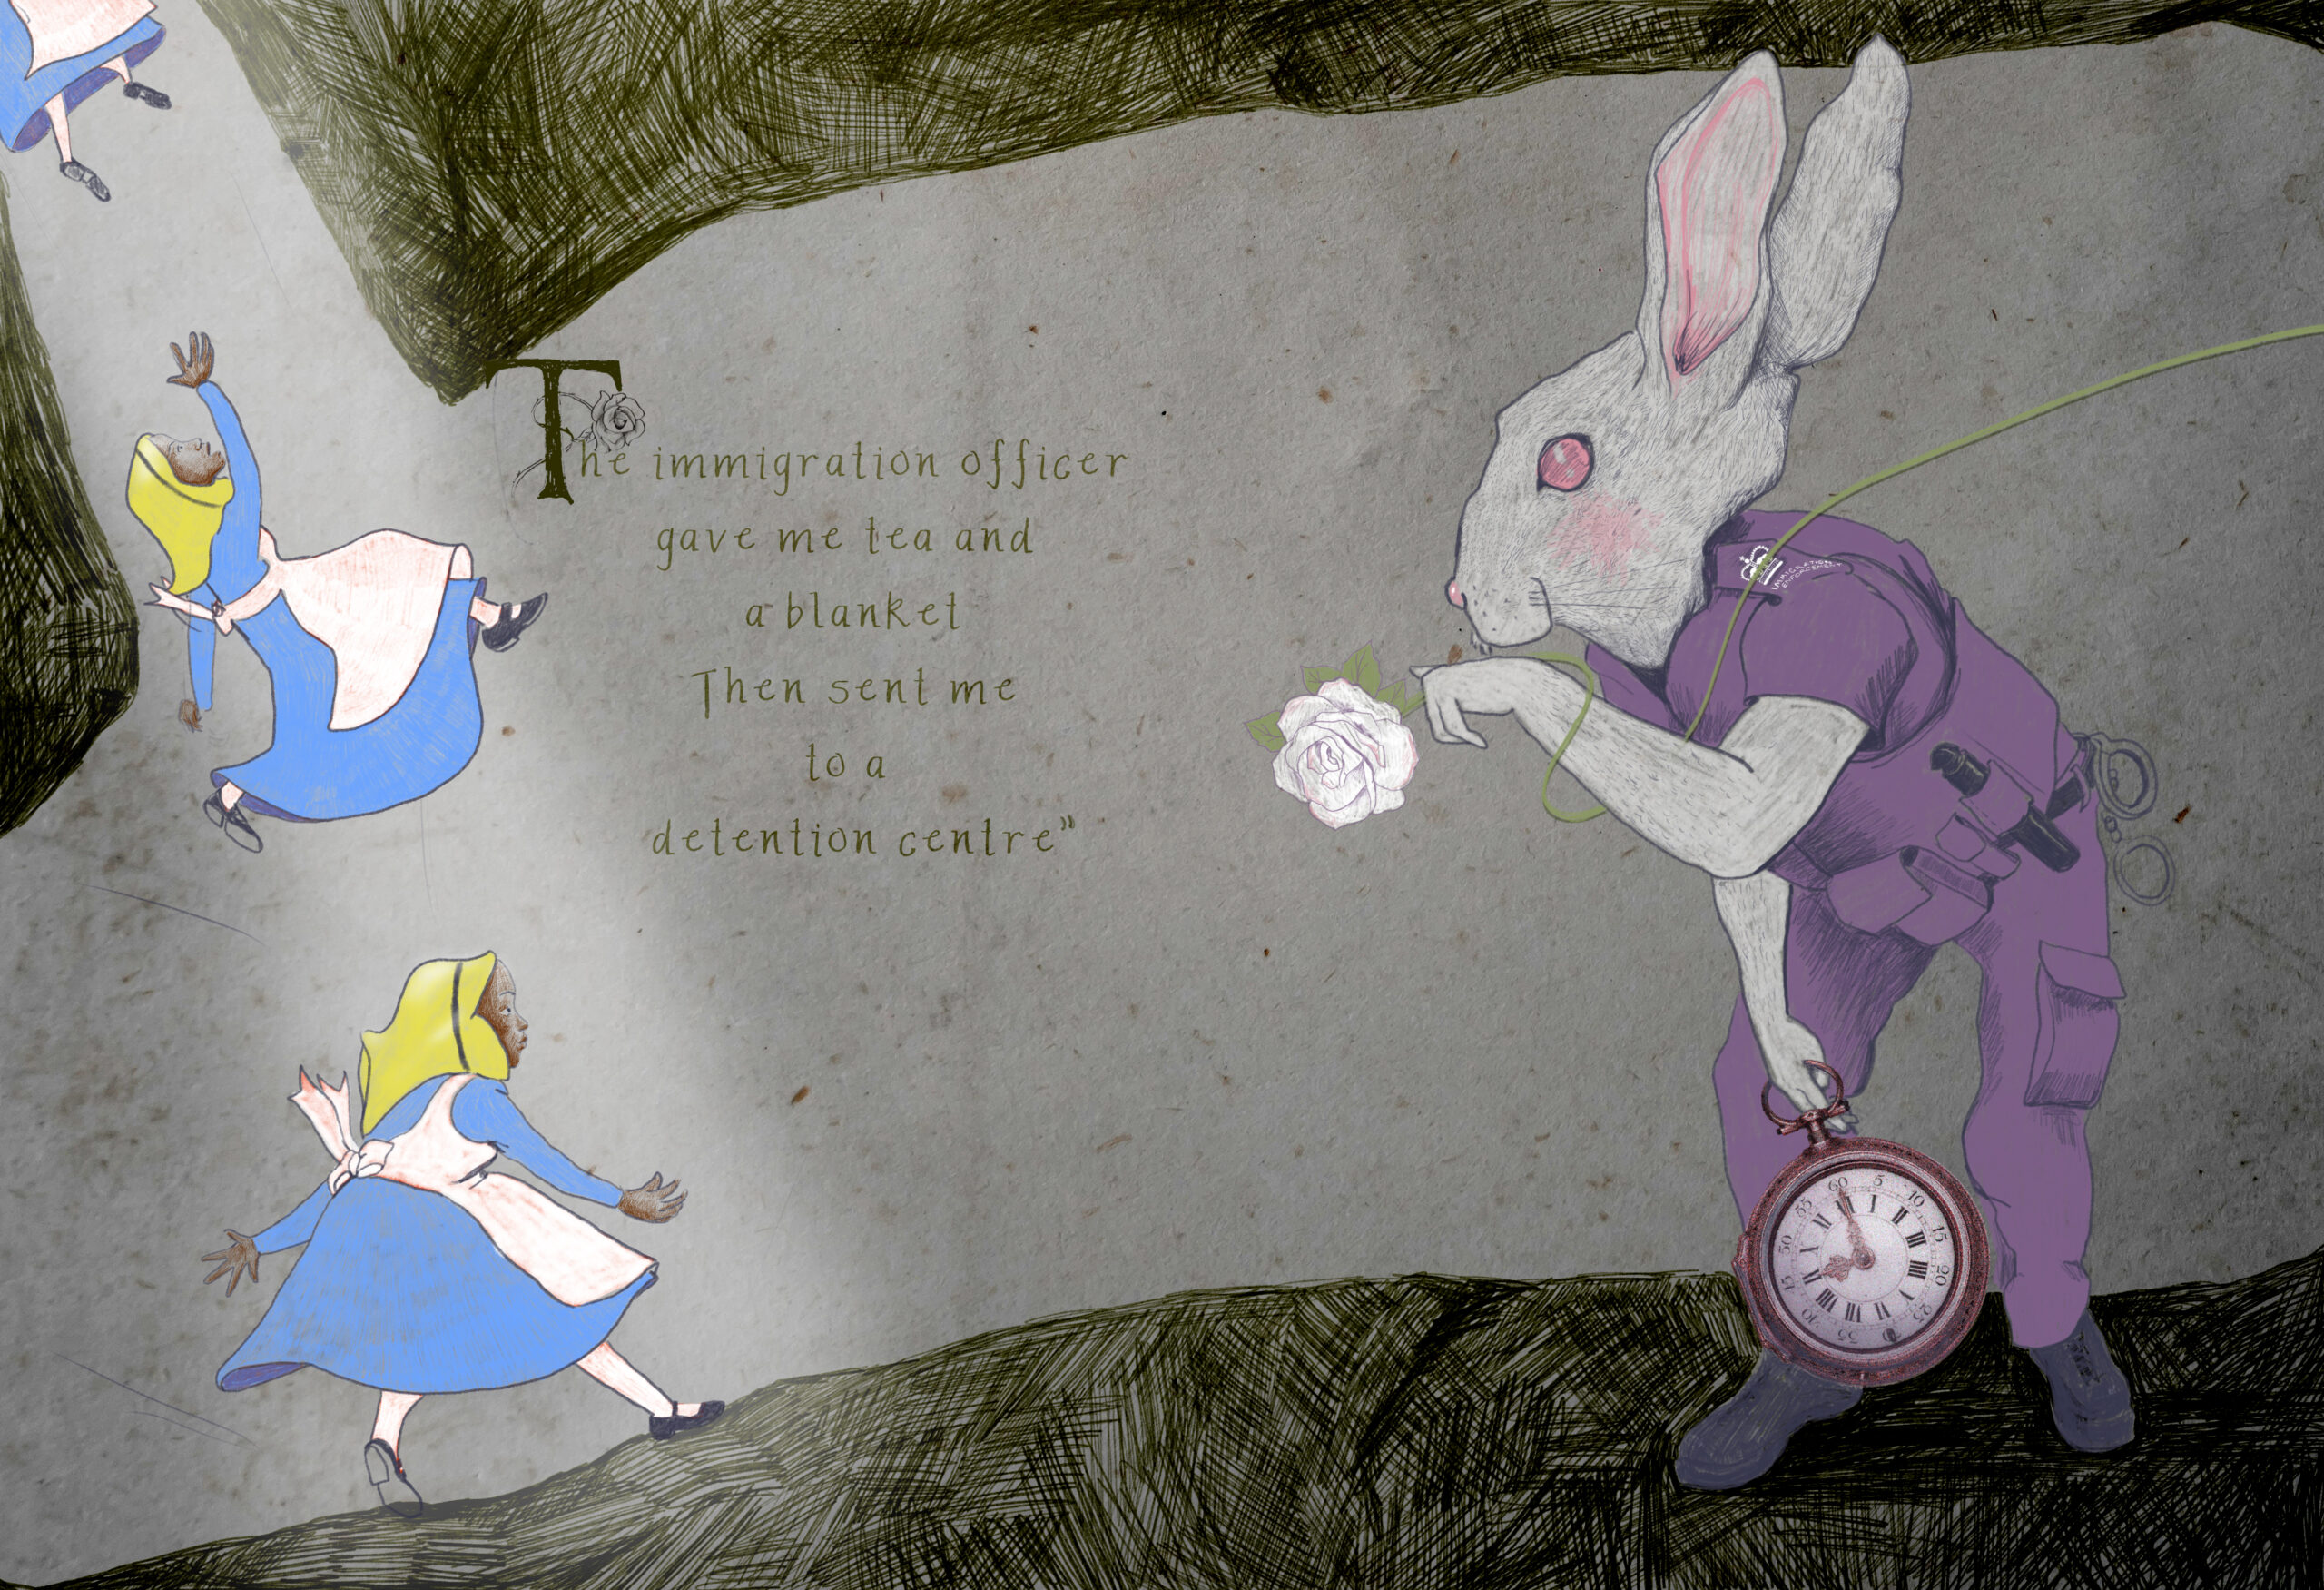 Alice is falling down the rabbit hole. She looks toward the White Rabbit who holds a flower and watch. The rabbit is dress in uniform with hand cuffs and a baton.